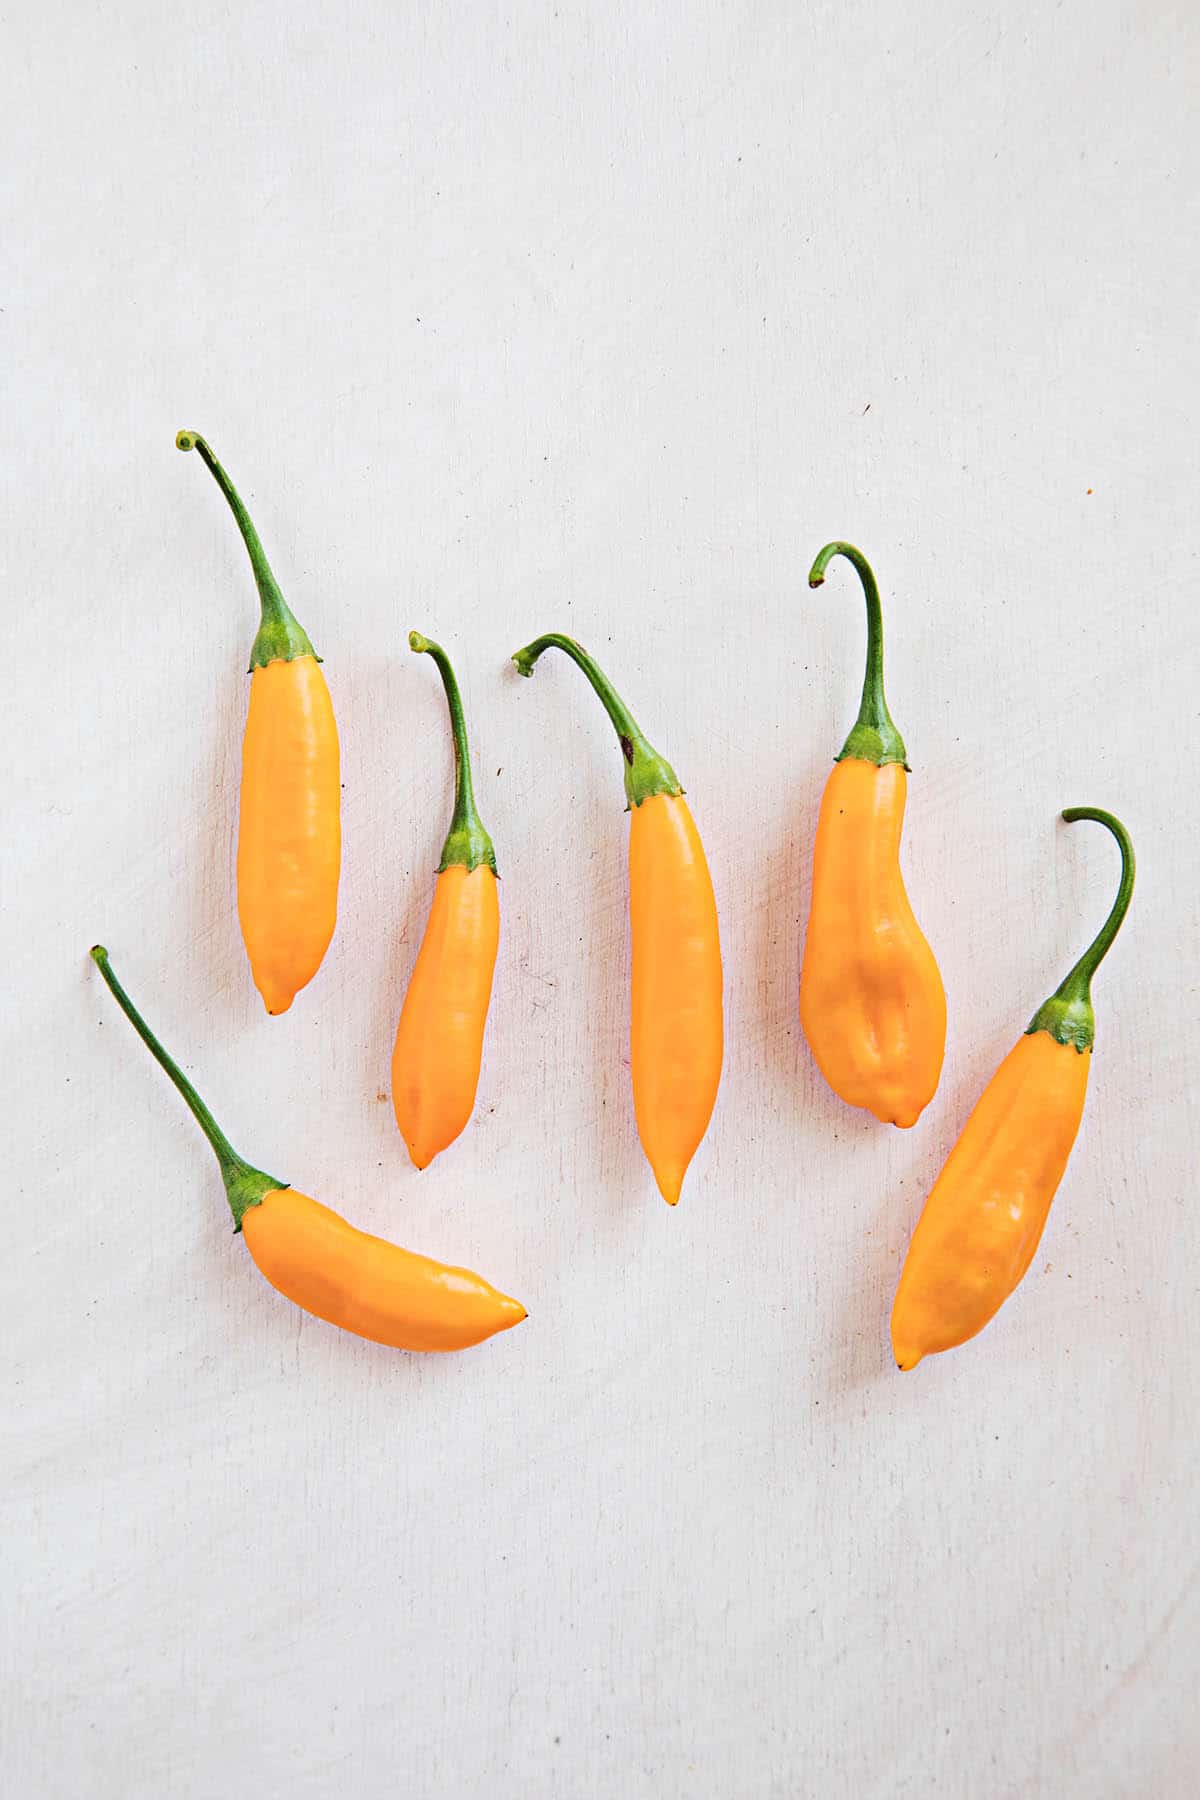 About the Aji Cito Chili Peppers